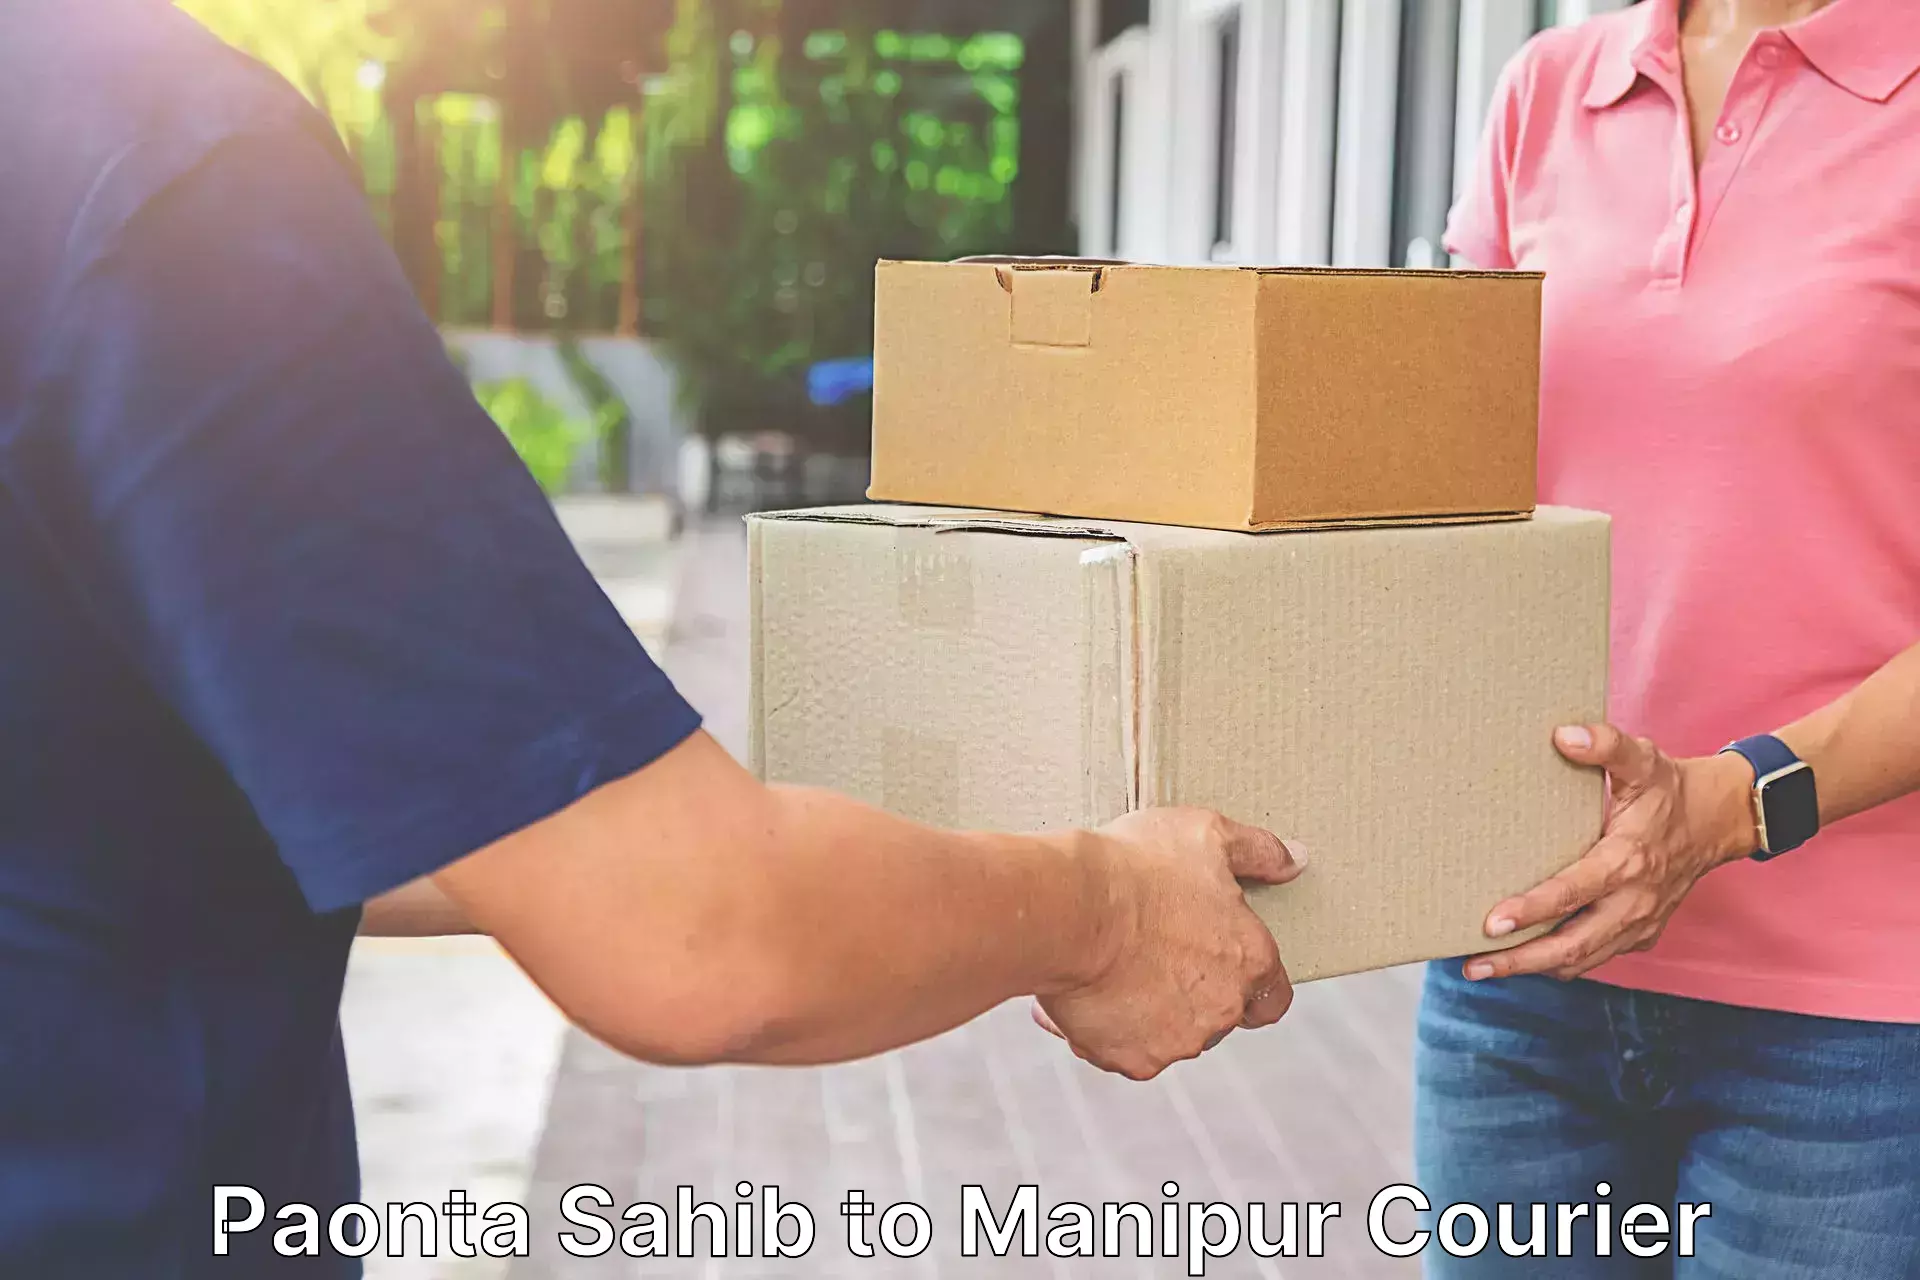 State-of-the-art courier technology Paonta Sahib to Imphal